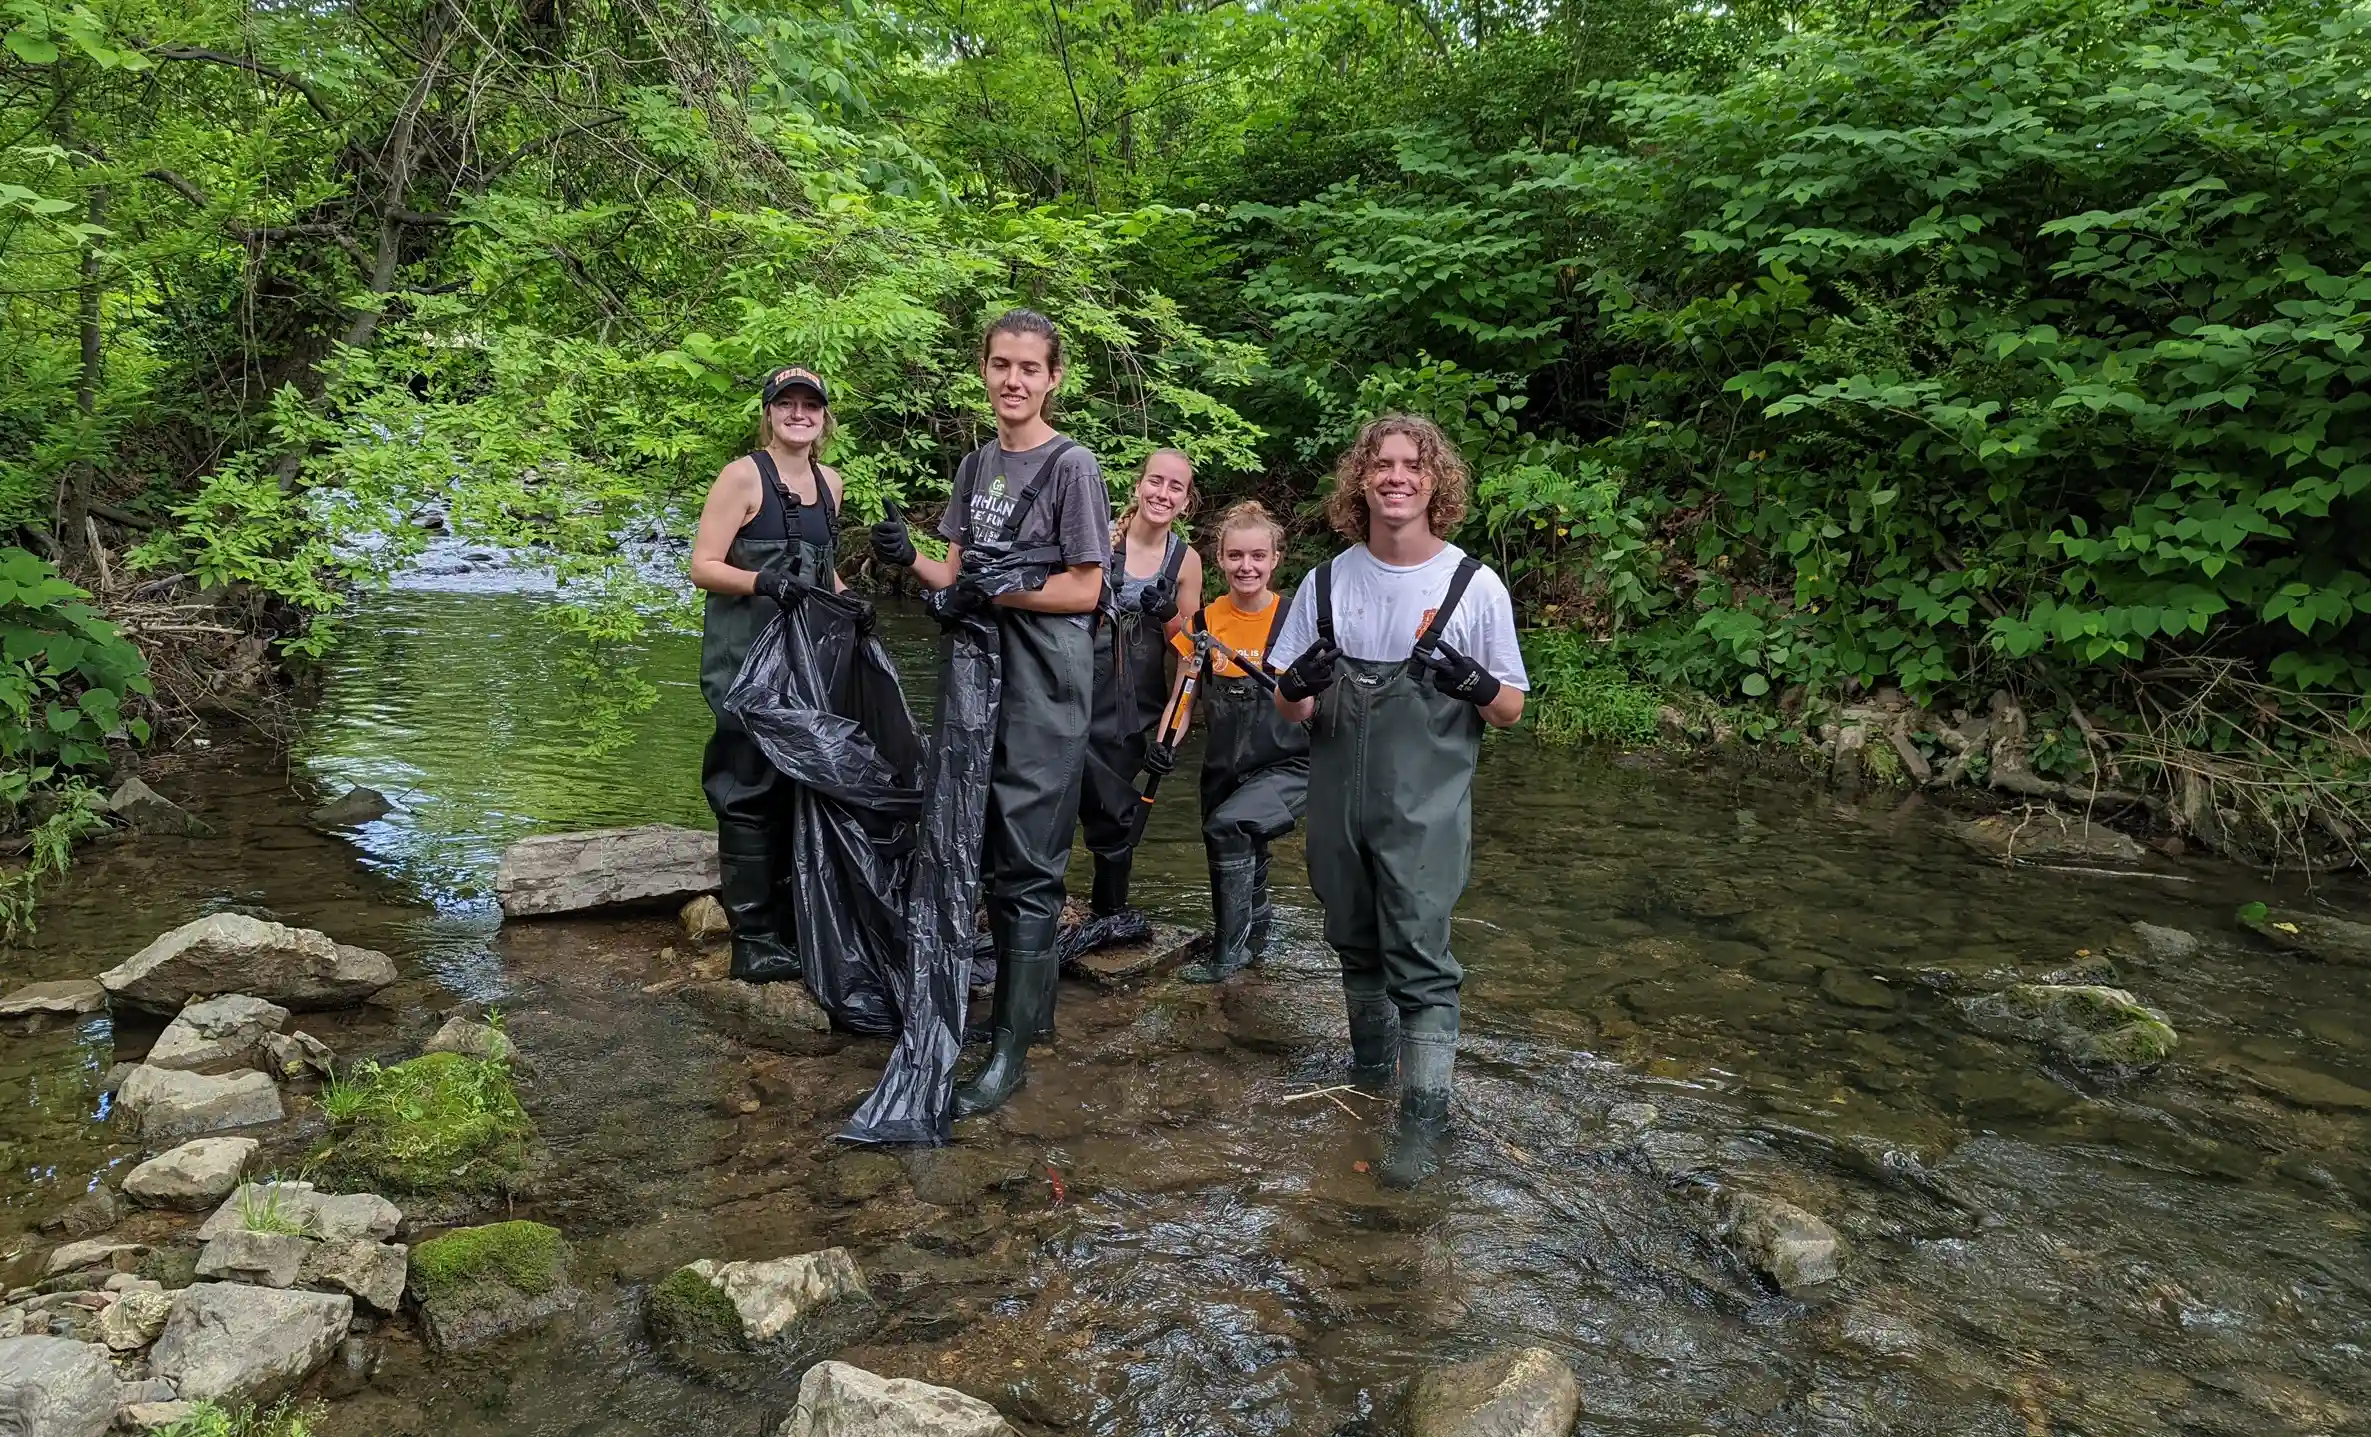 Students in waders in a creek